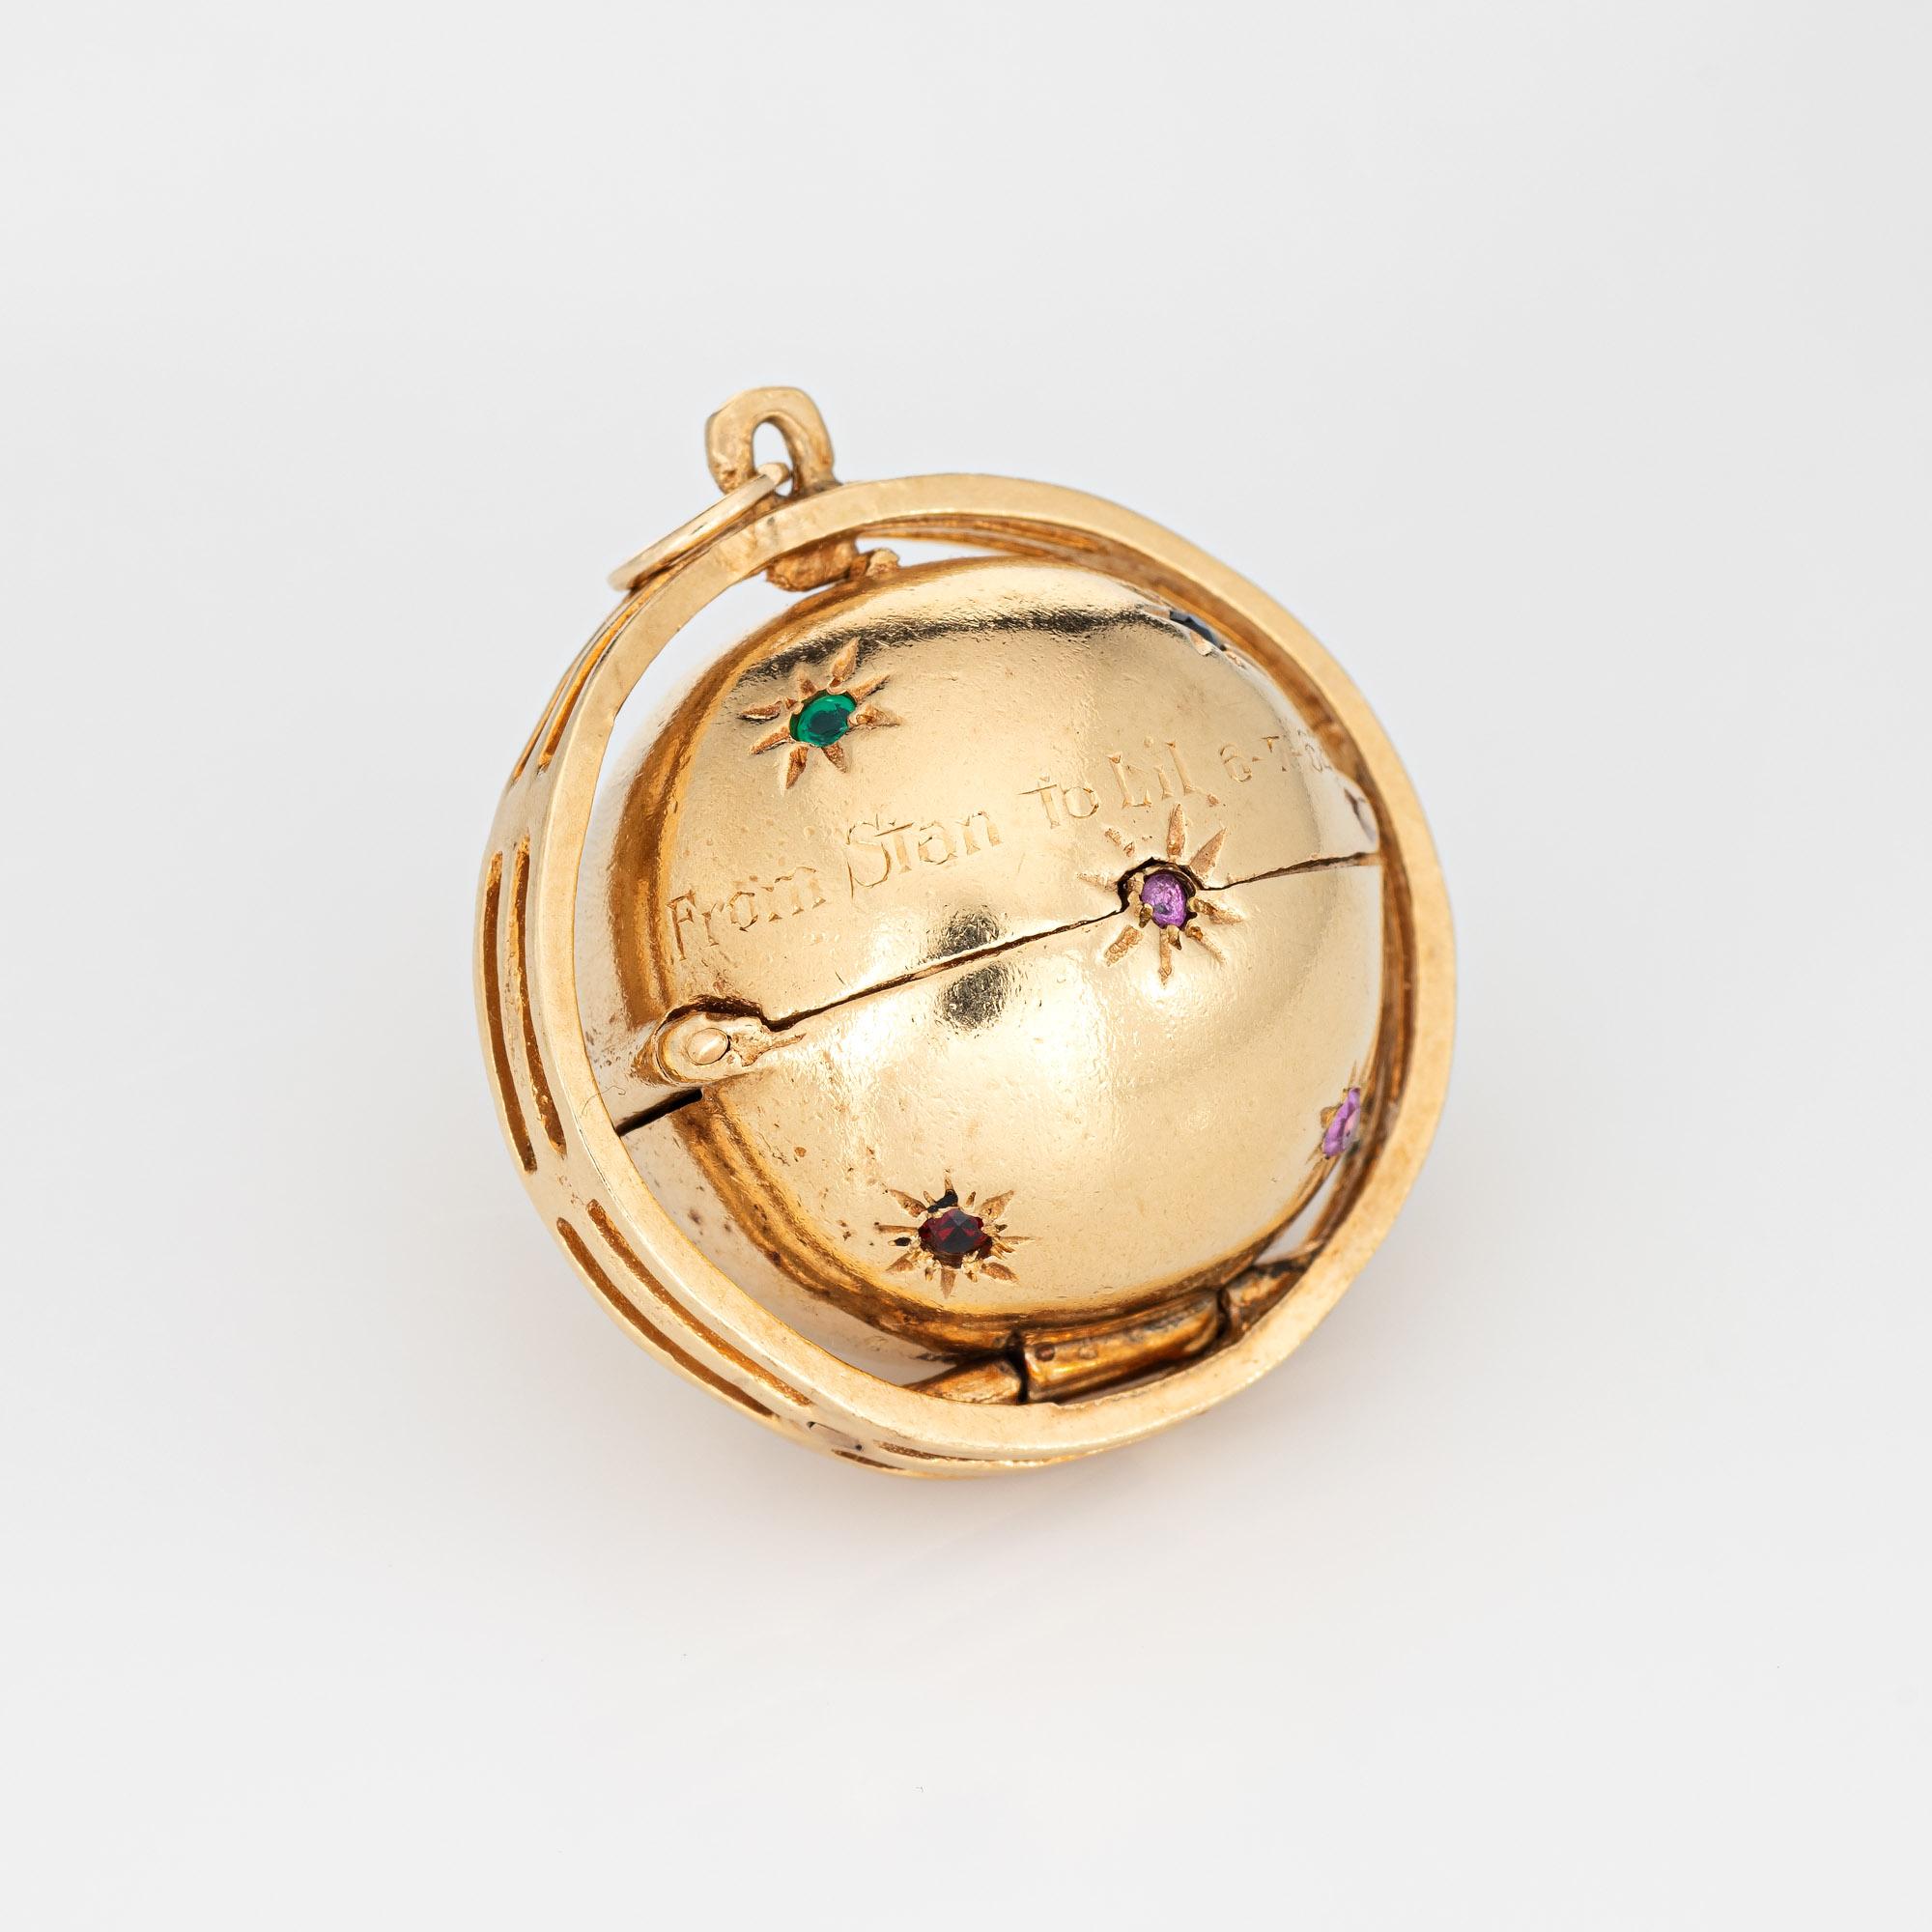 Finely detailed vintage folding picture charm (circa 1962) crafted in 14 karat yellow gold. 

The orb is secured with a hinged clip to allow the picture frames to collapse and contract neatly back into the orb. A total of three picture frames are